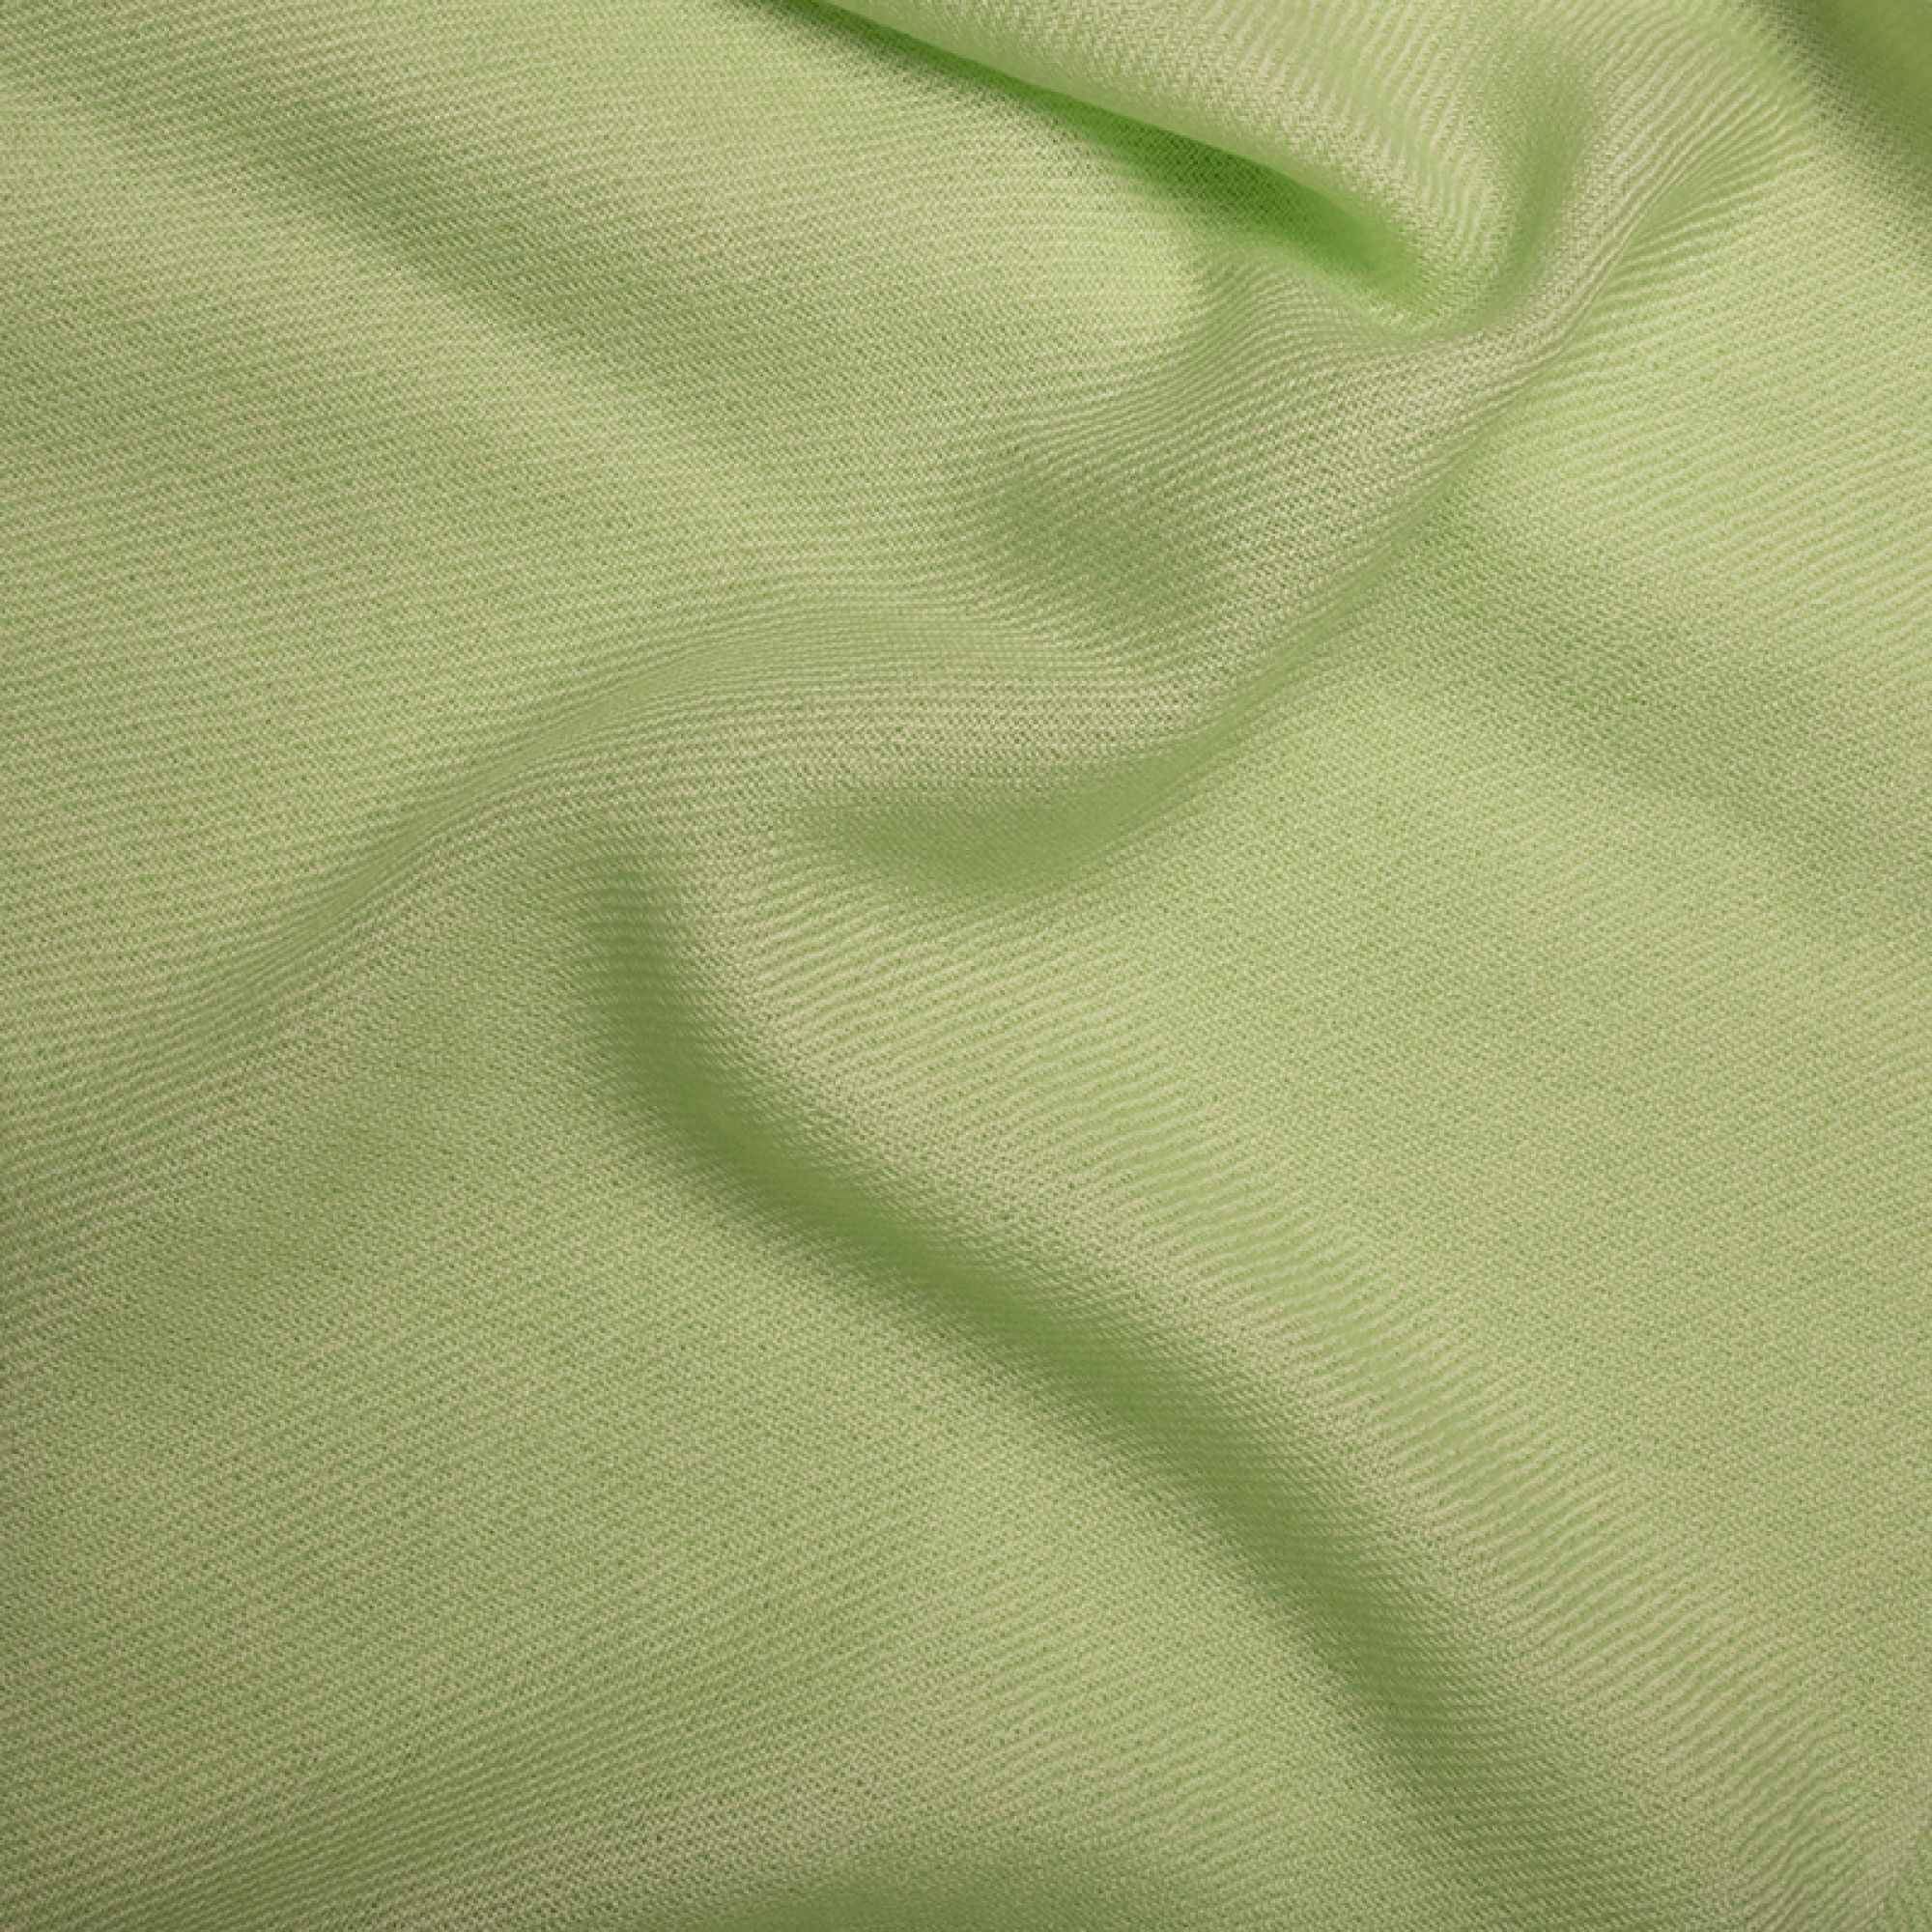 Cashmere accessories blanket toodoo plain m 180 x 220 lime green 180 x 220 cm